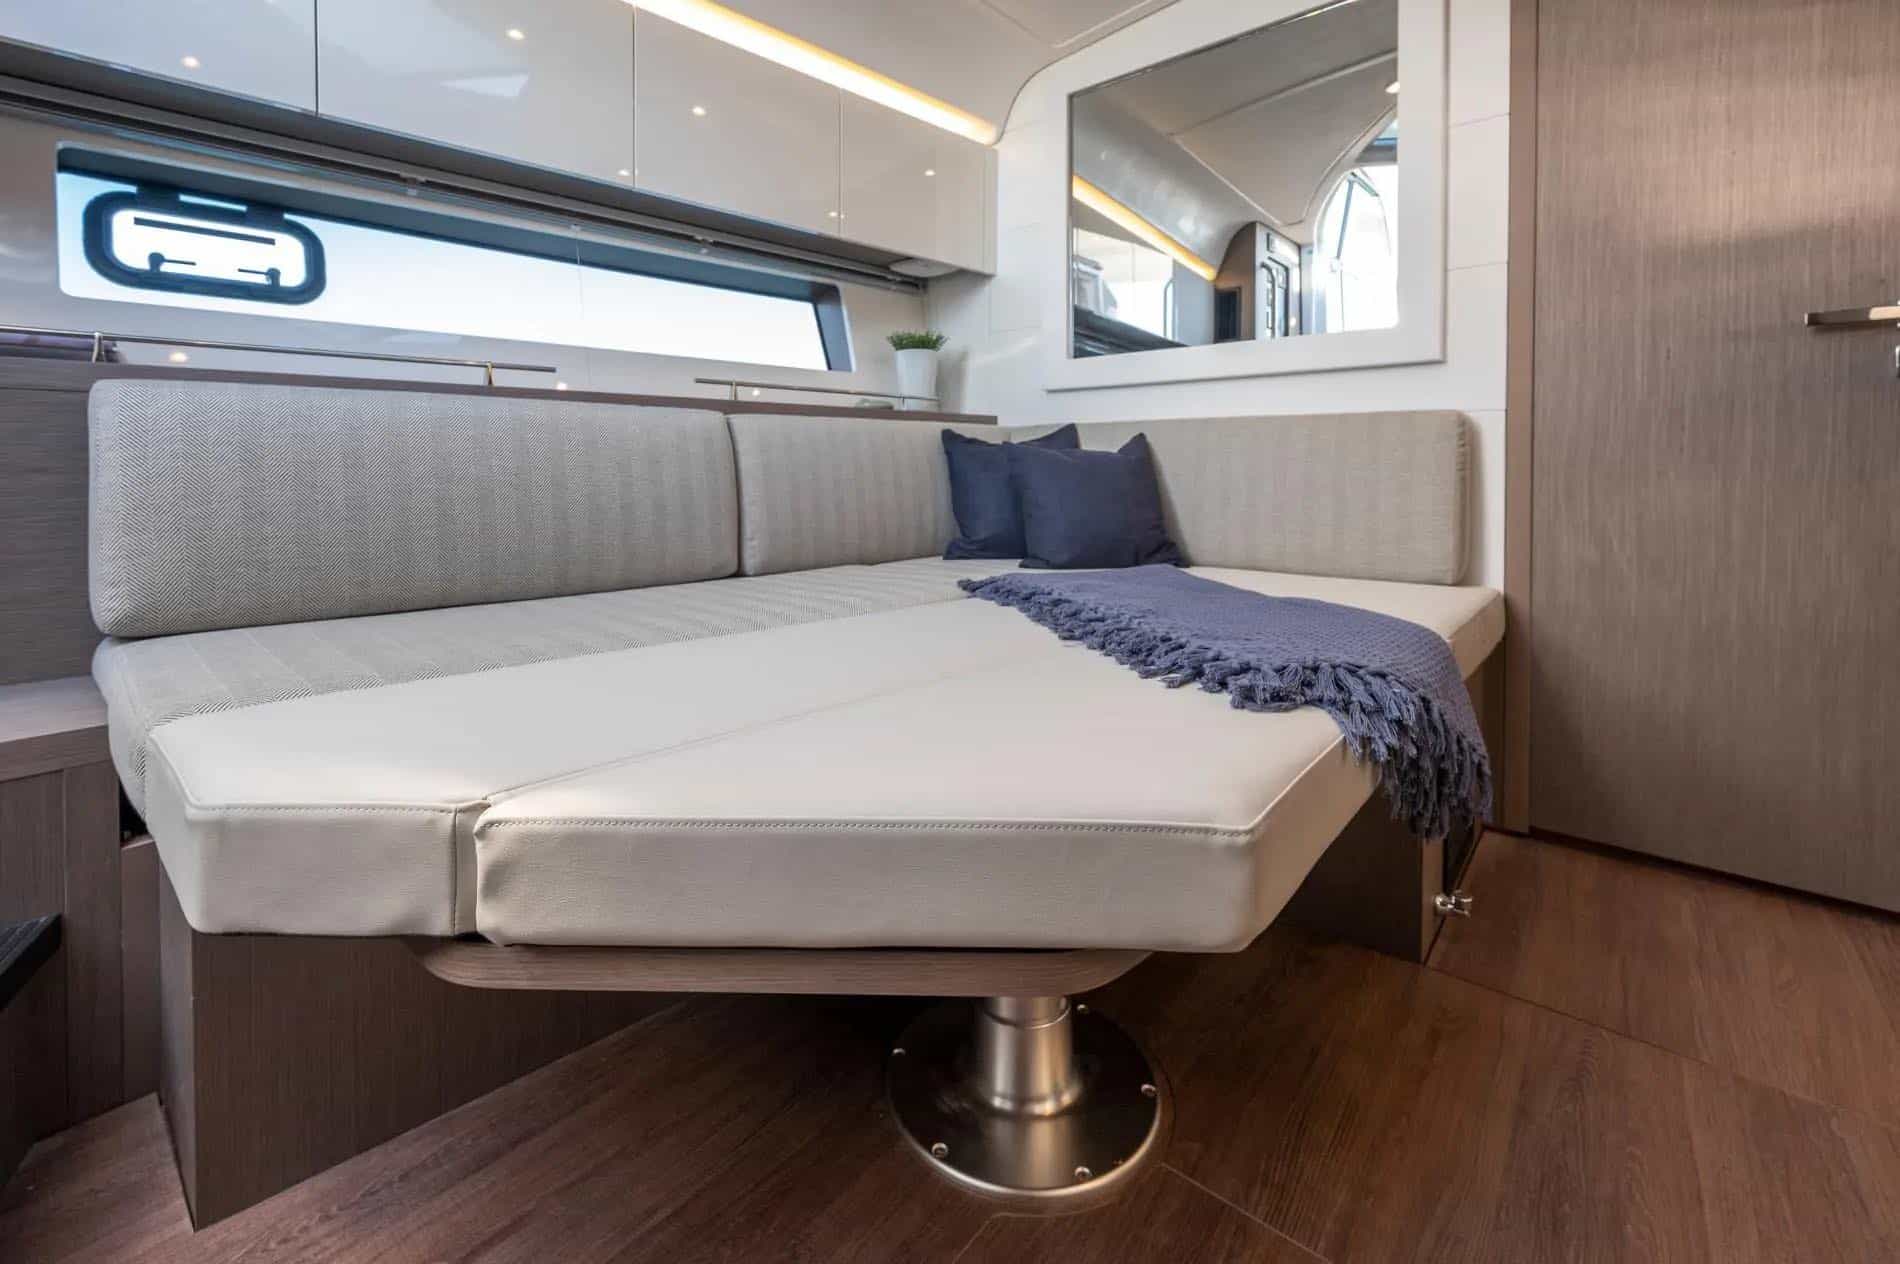 41' BENETEAU 2023 -DINING TO BED CONVERSION